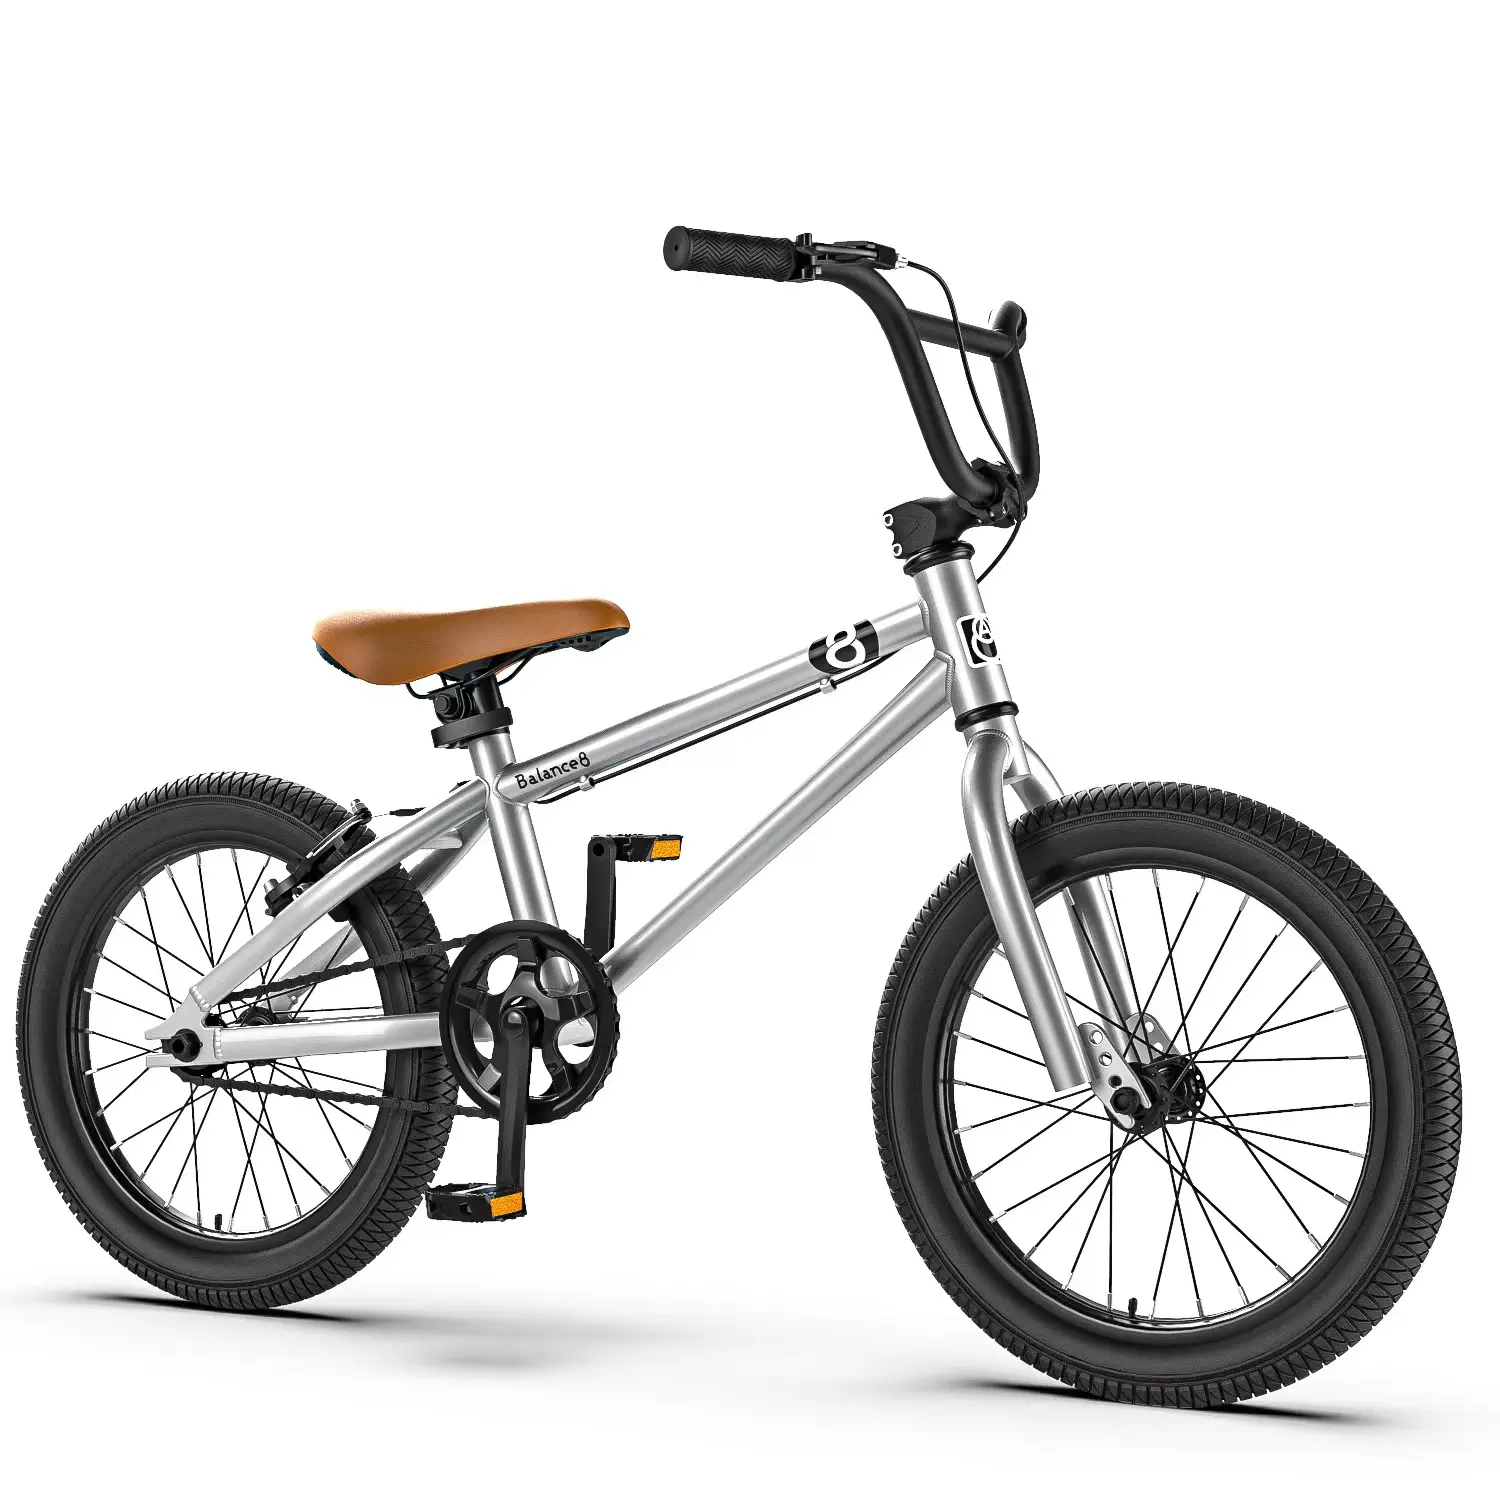 BMX kids Ride mountain bikes single speed fashion model 16 20 inch bicycle high carbon steel frame red silver with cheap price